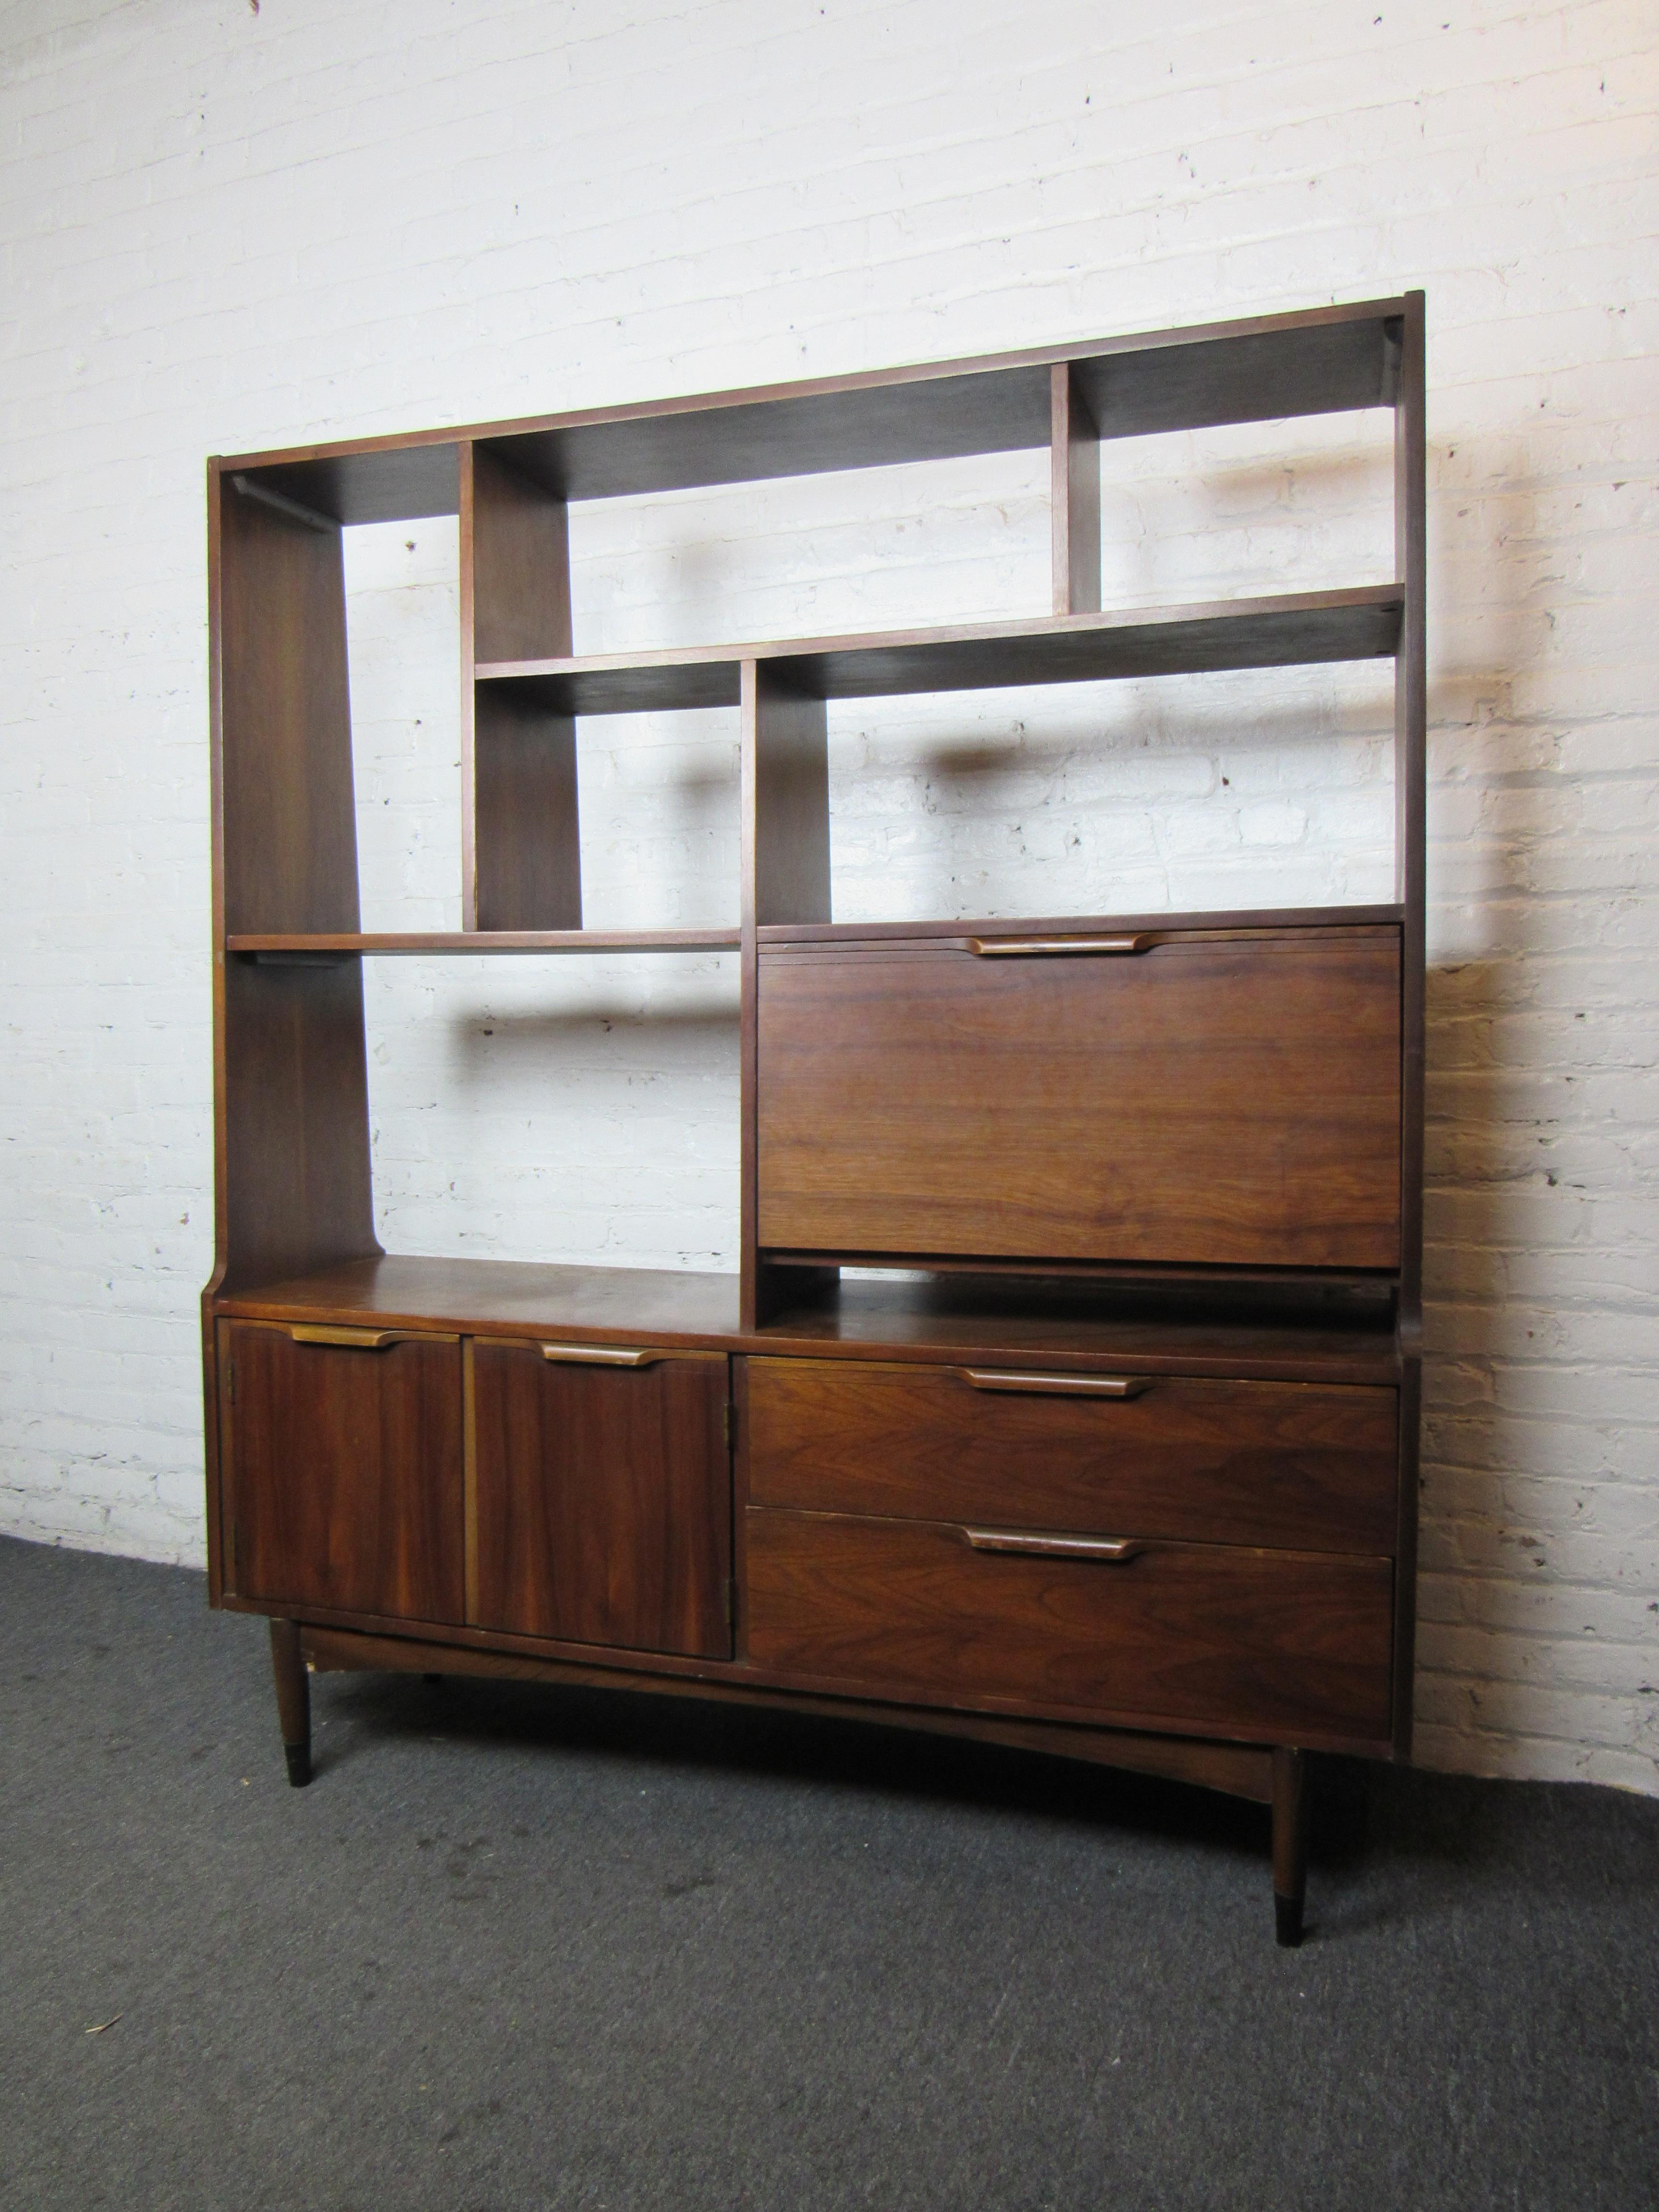 This vintage wall unit offers plenty of storage with an array of shelves and partitions, as well as large storage compartments. One compartment opens to reveal a light for display of items. Please confirm item location with seller (NY/NJ).